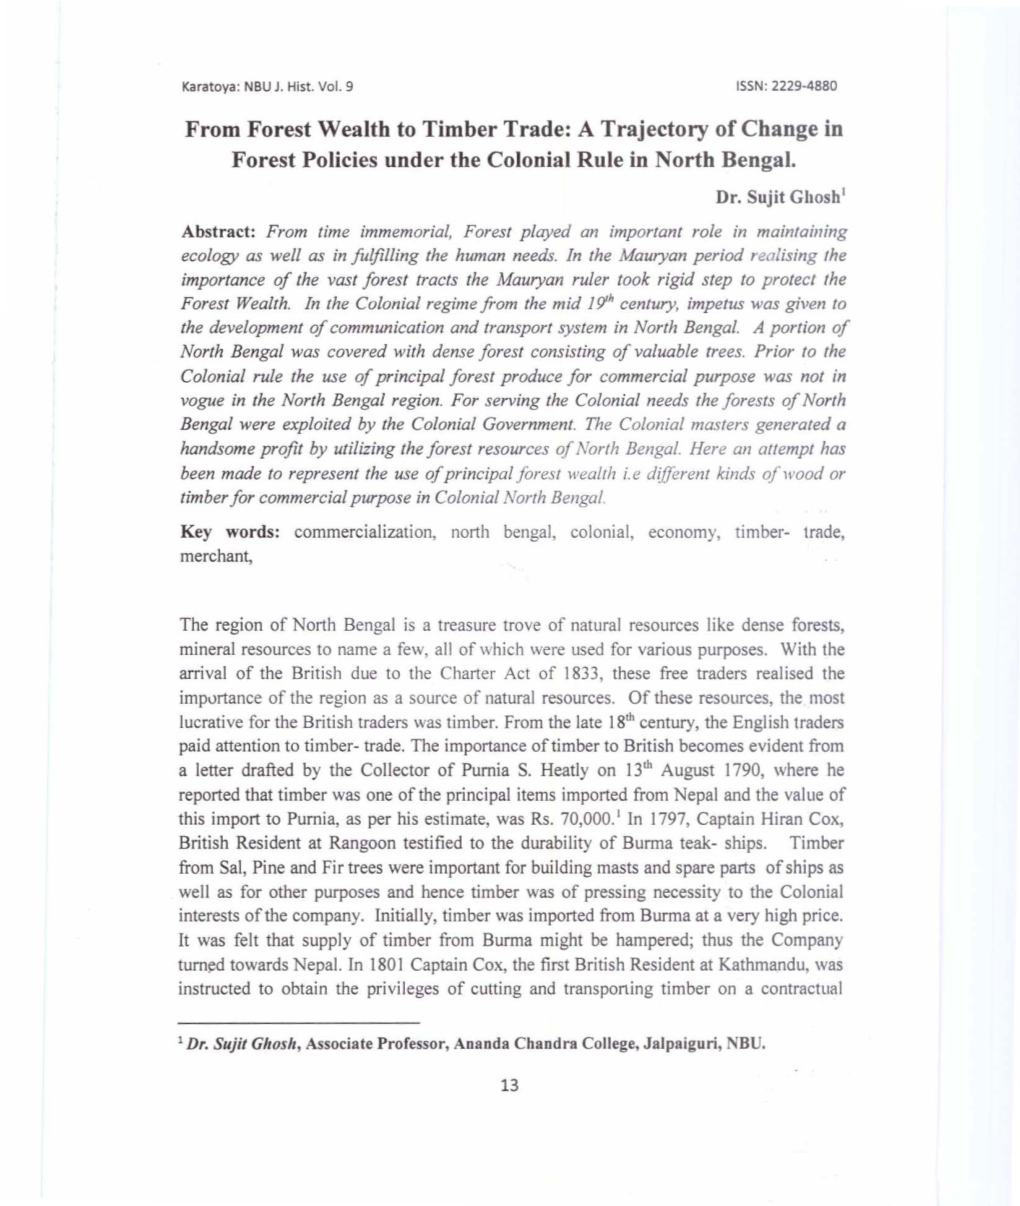 From Forest Wealth to Timber Trade: a Trajectory of Change in Forest Policies Under the Colonial Rule in North Bengal